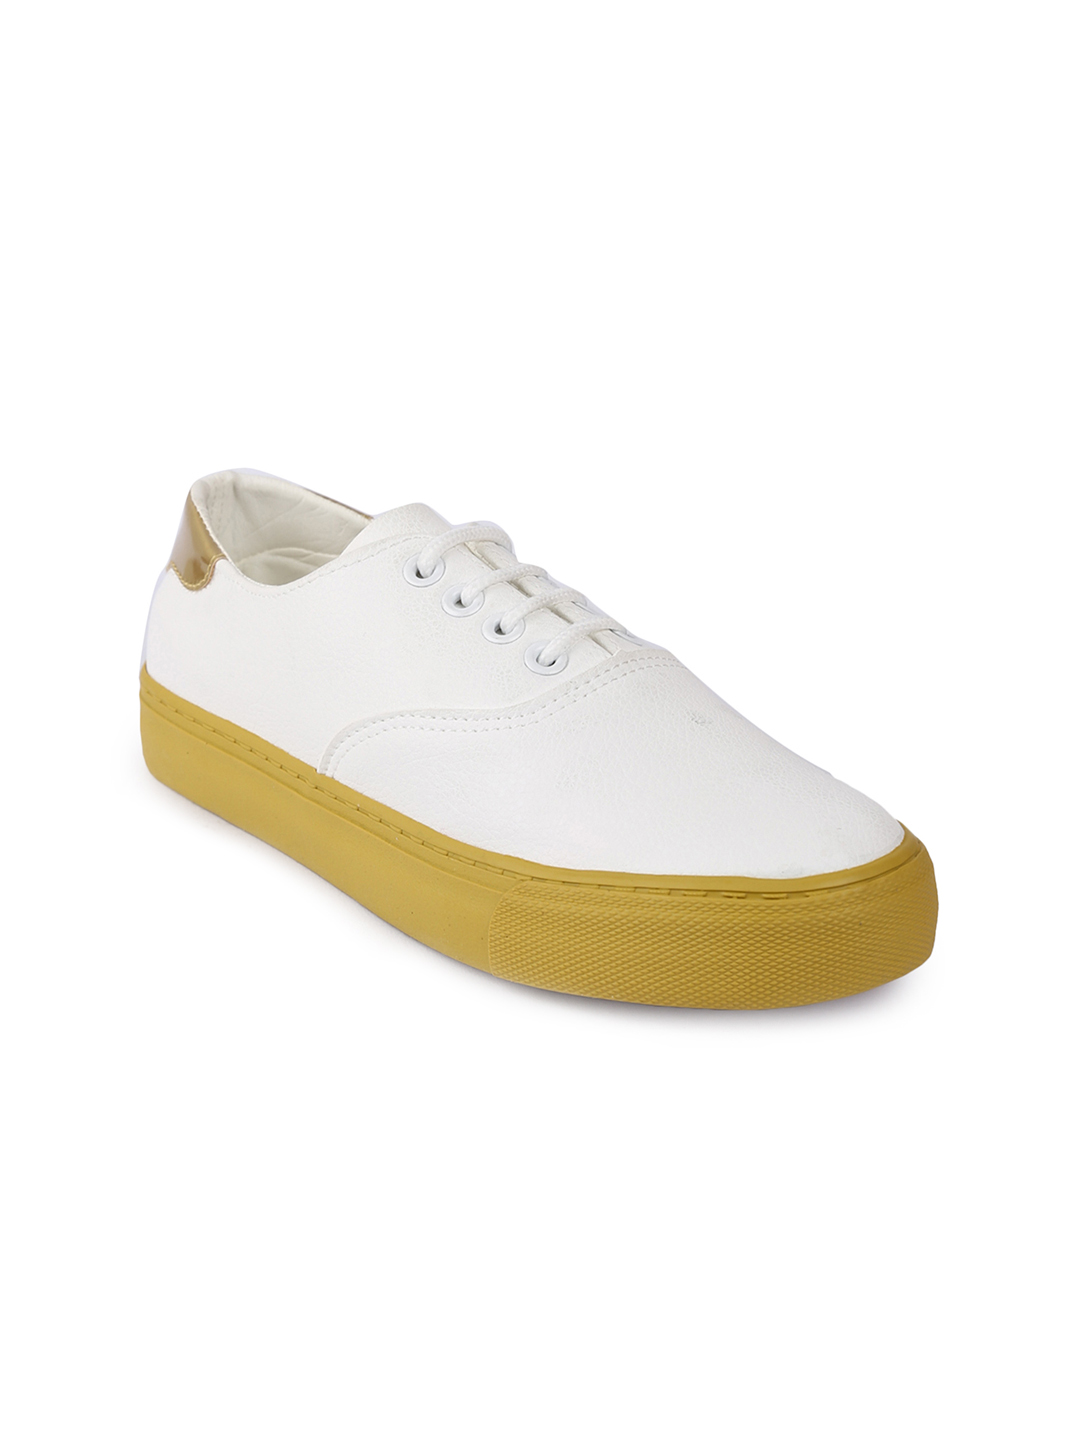 Lovely Chick Women White & Gold-Toned Sneakers Price in India